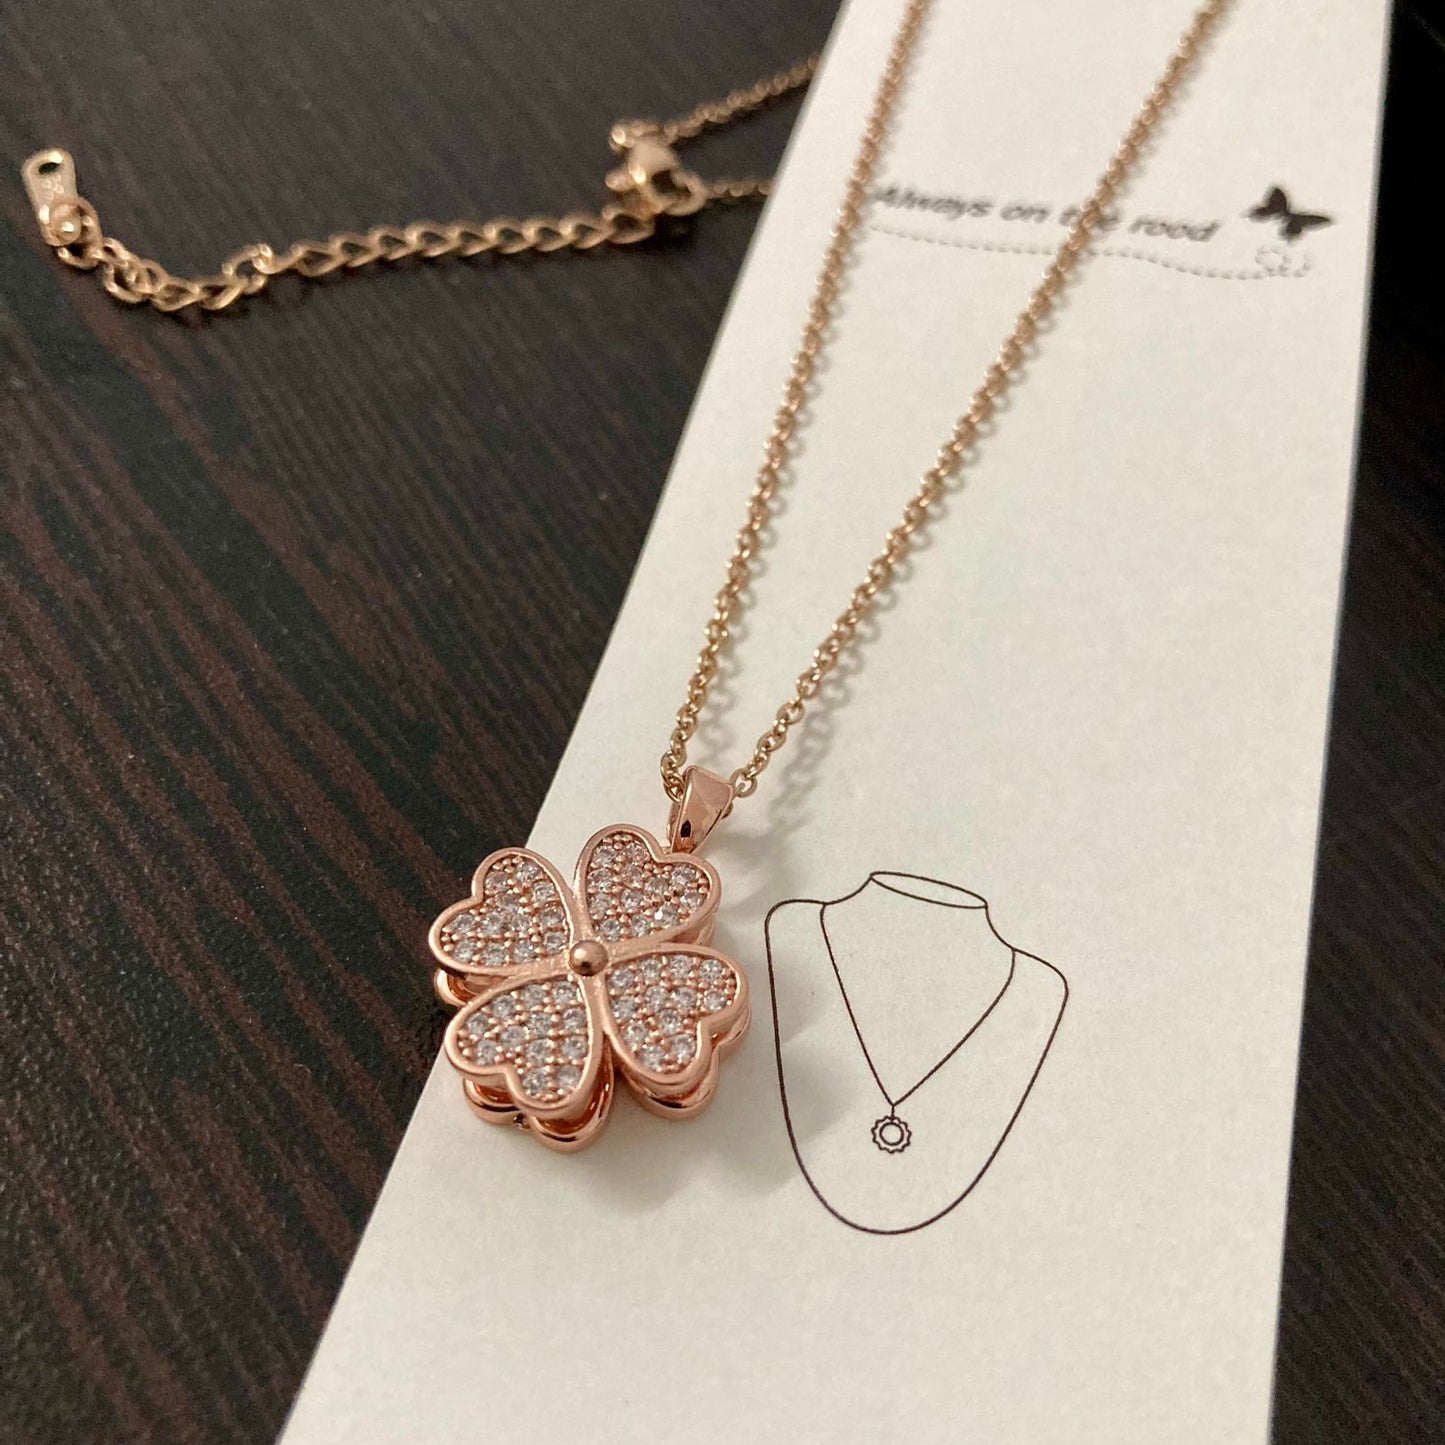 Cute Gift- Mimimalist RoseGold Chain With Spinning Pendant